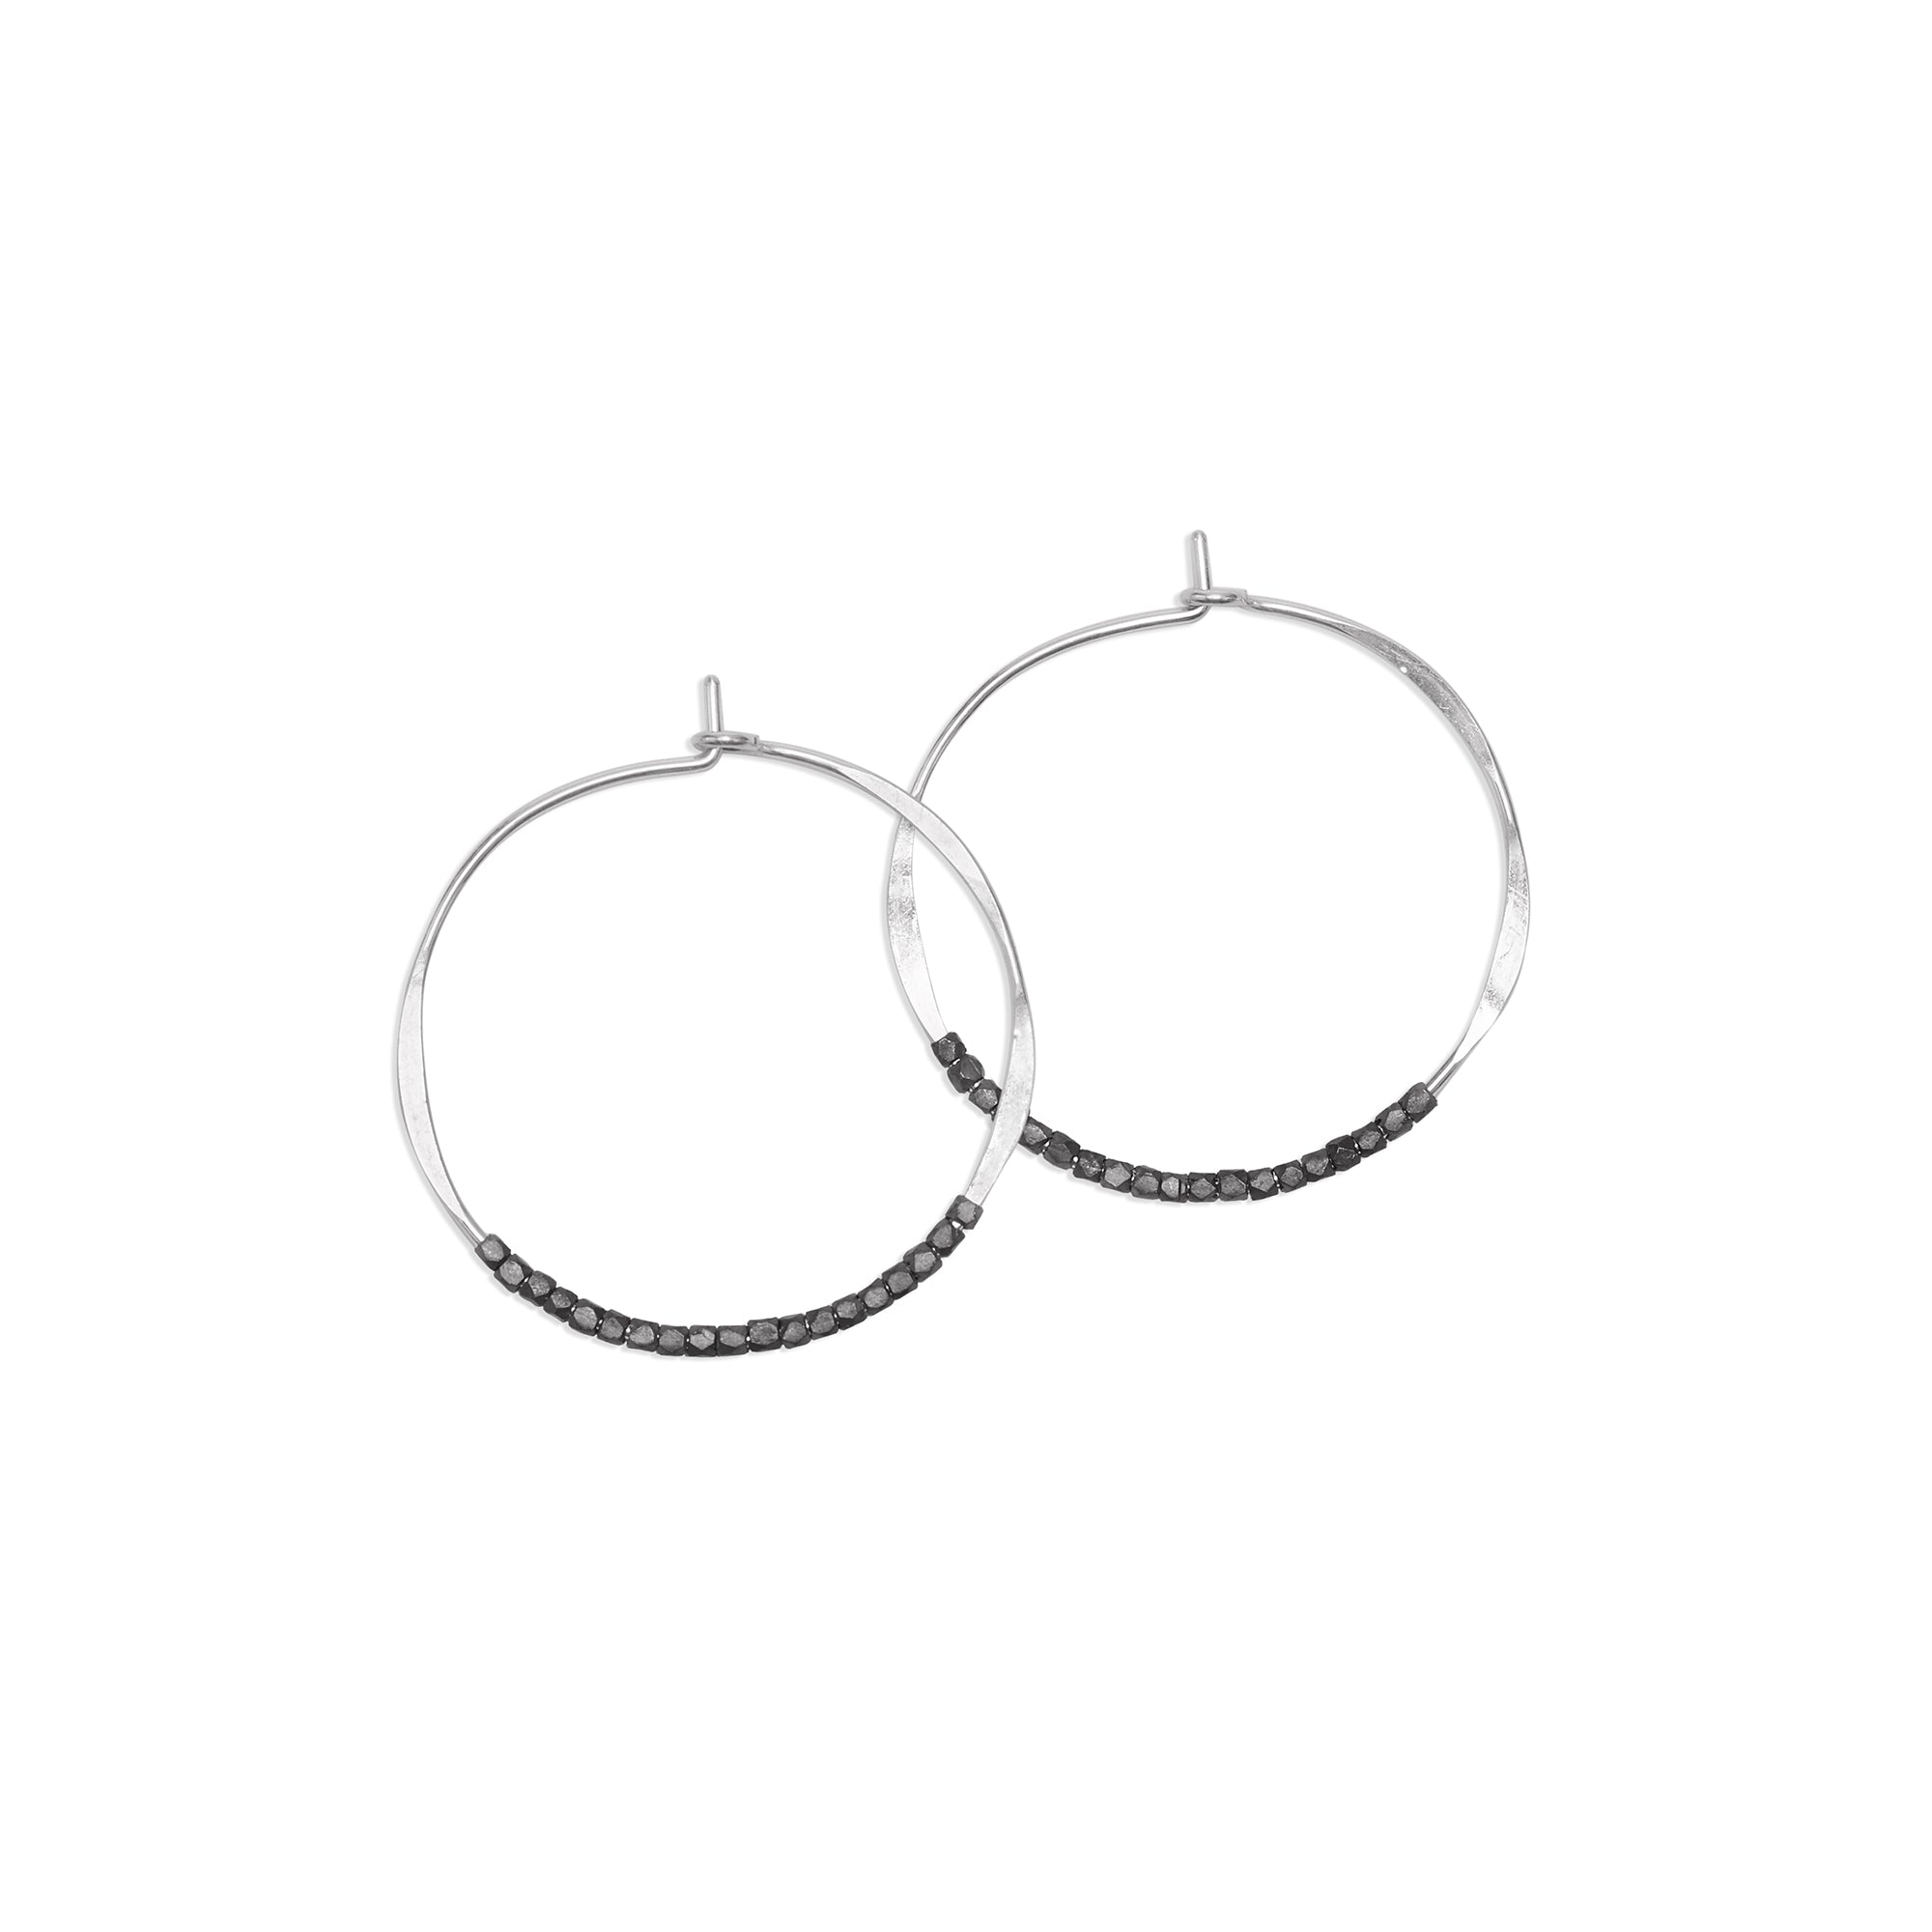 The Oxidized Bead Hoops are classic, lightweight earrings adorned with delicate oxidized sterling silver beads.